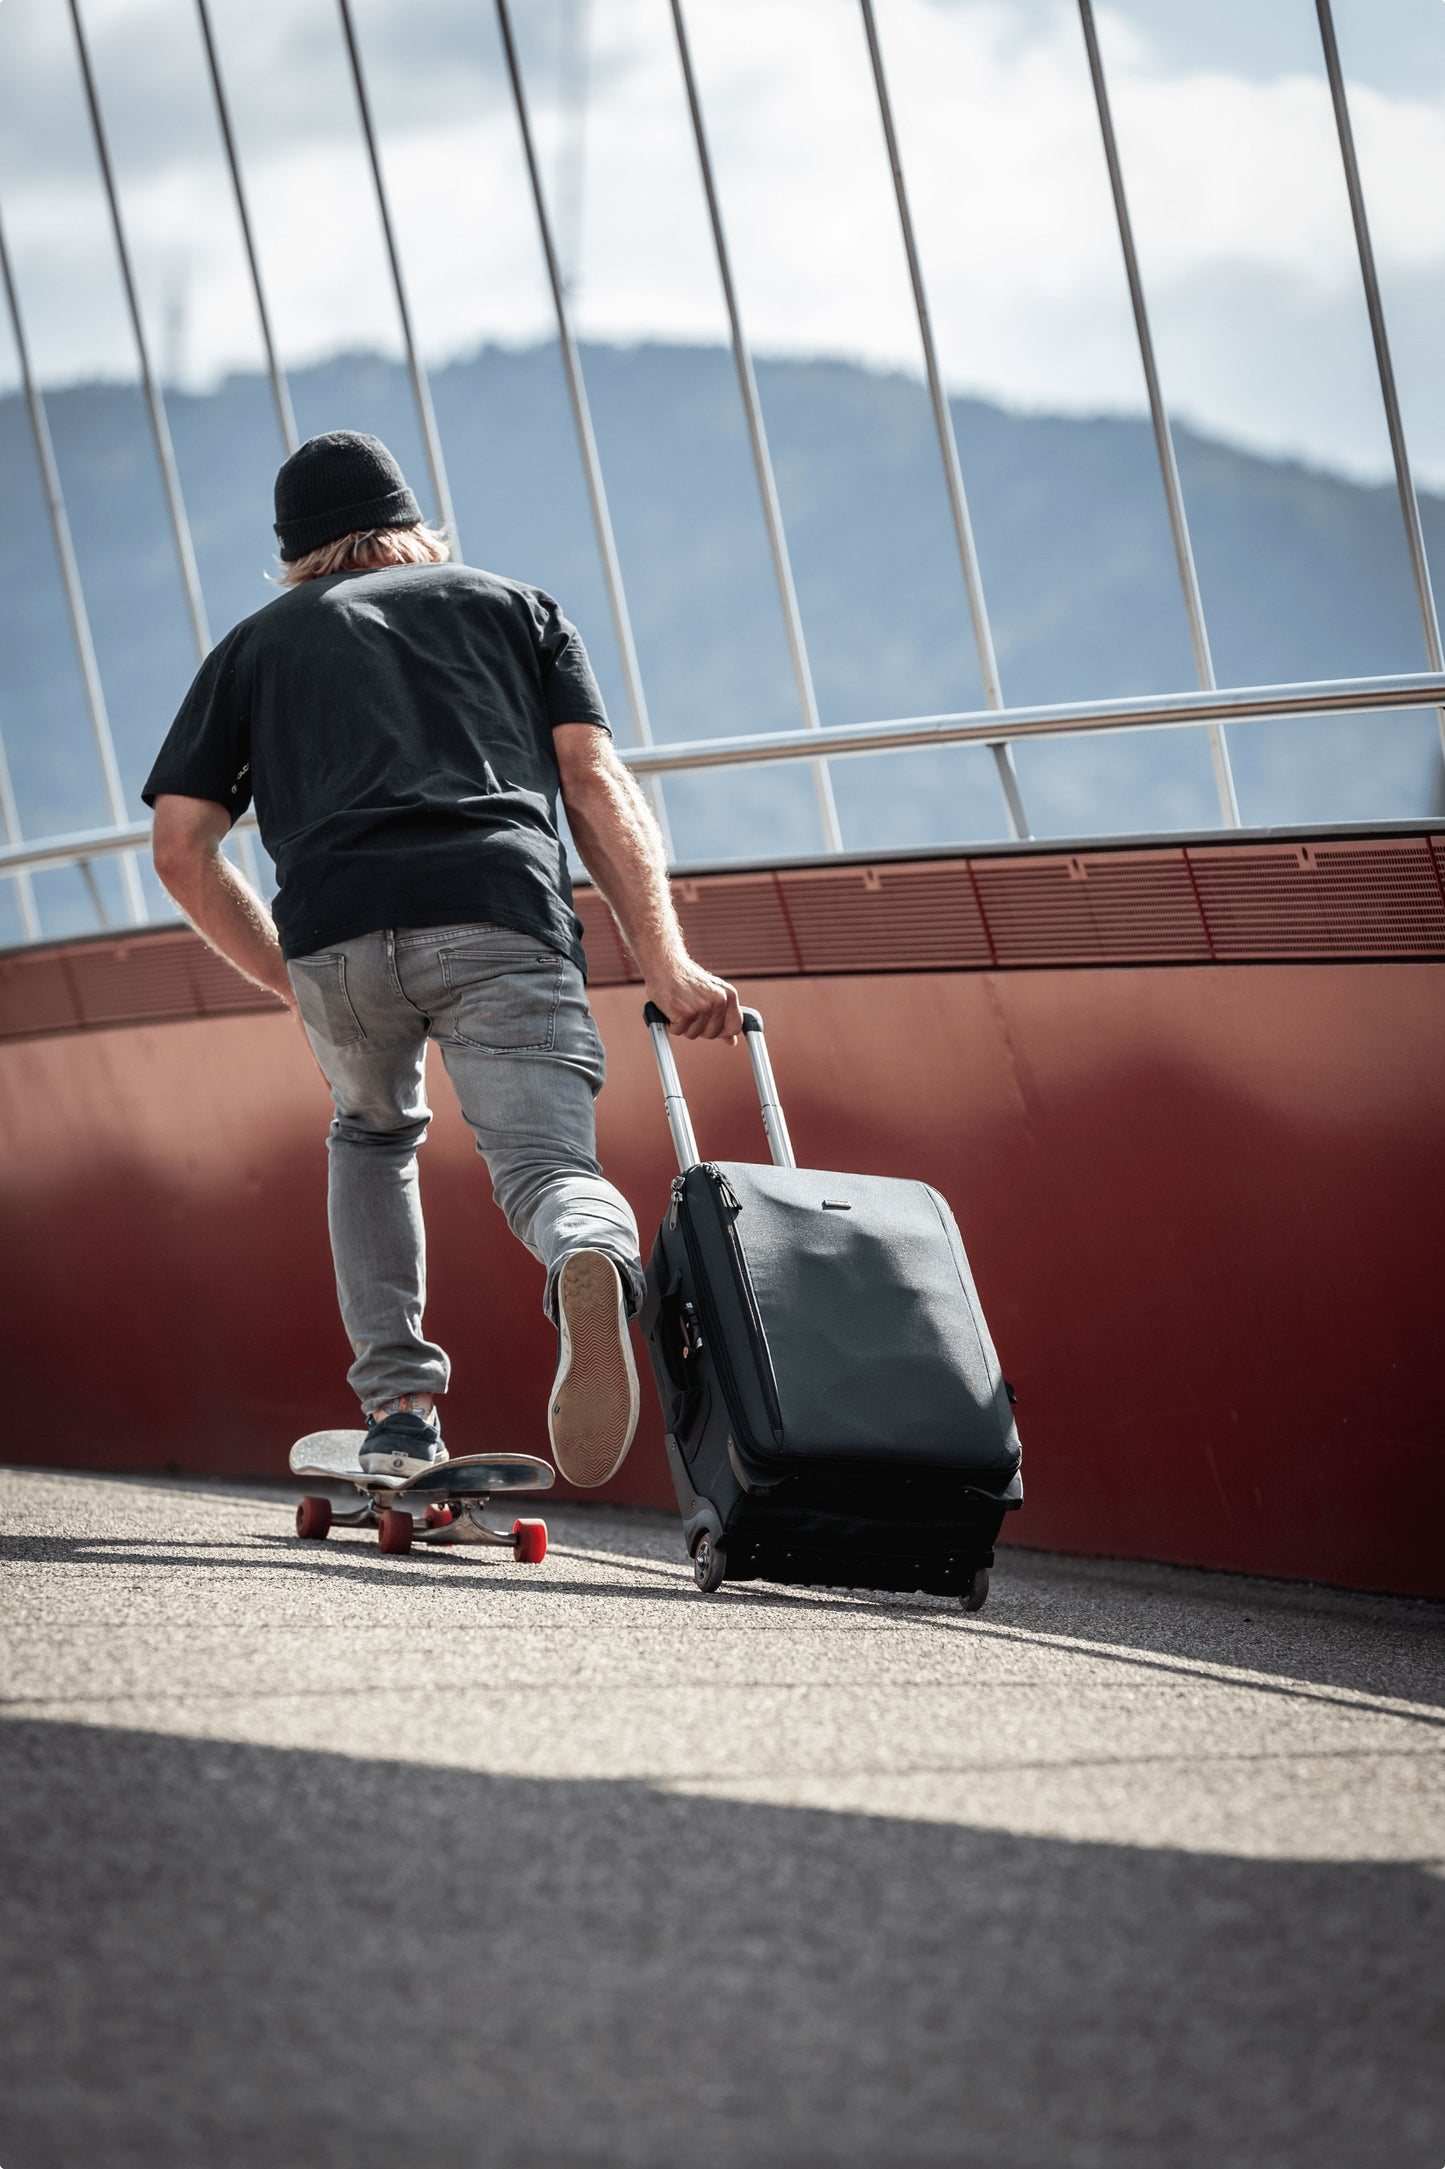 A person riding a skateboard, while rolling a suitcase behind him